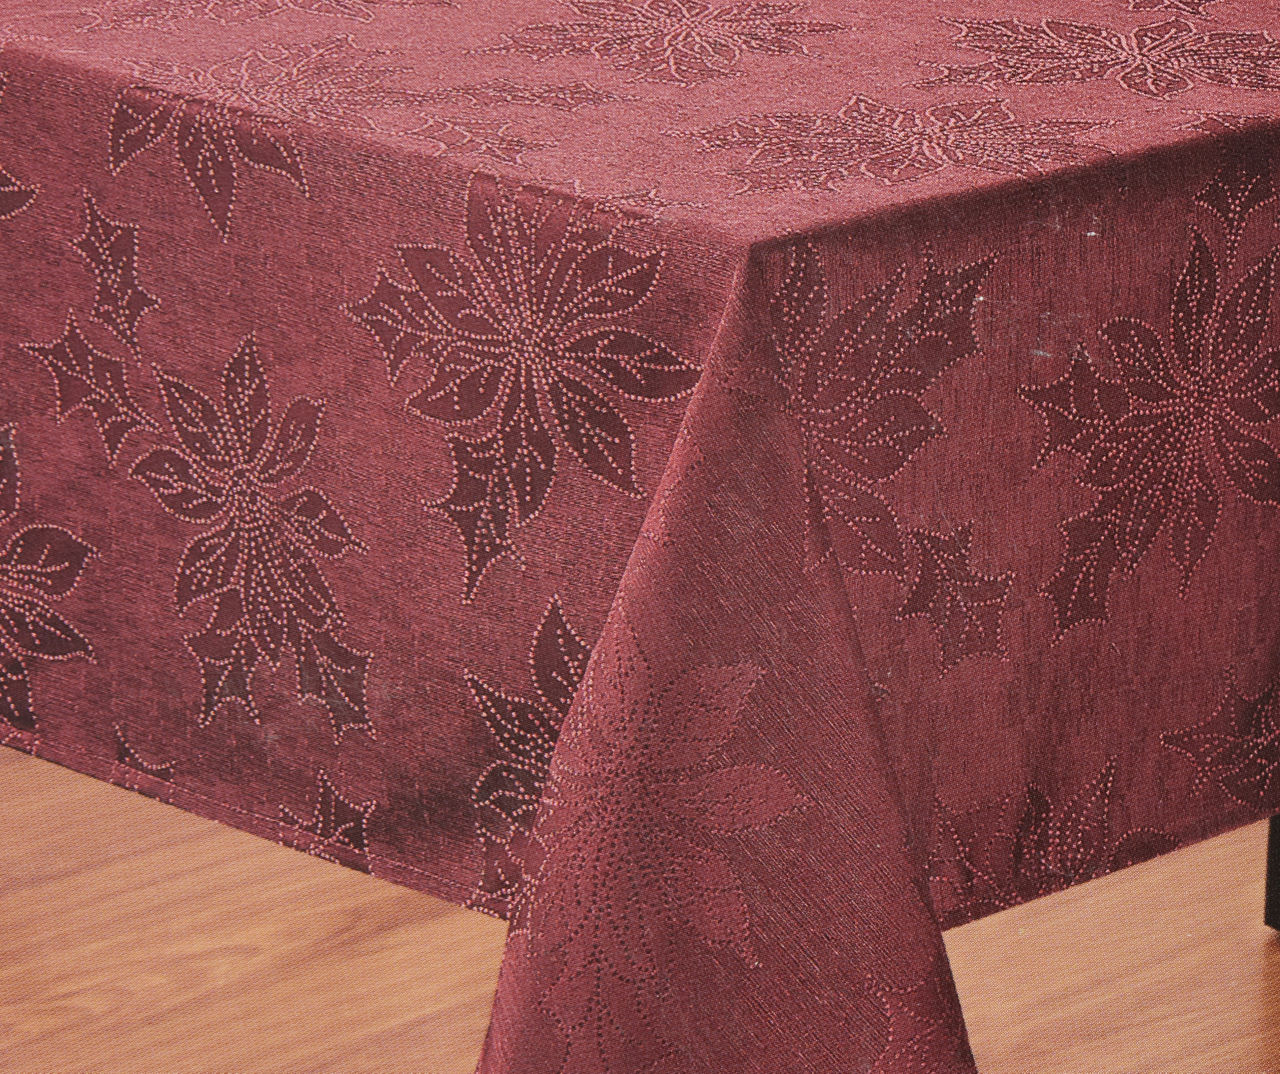 Red Poinsettia Fabric Tablecloth, (52" x 70")